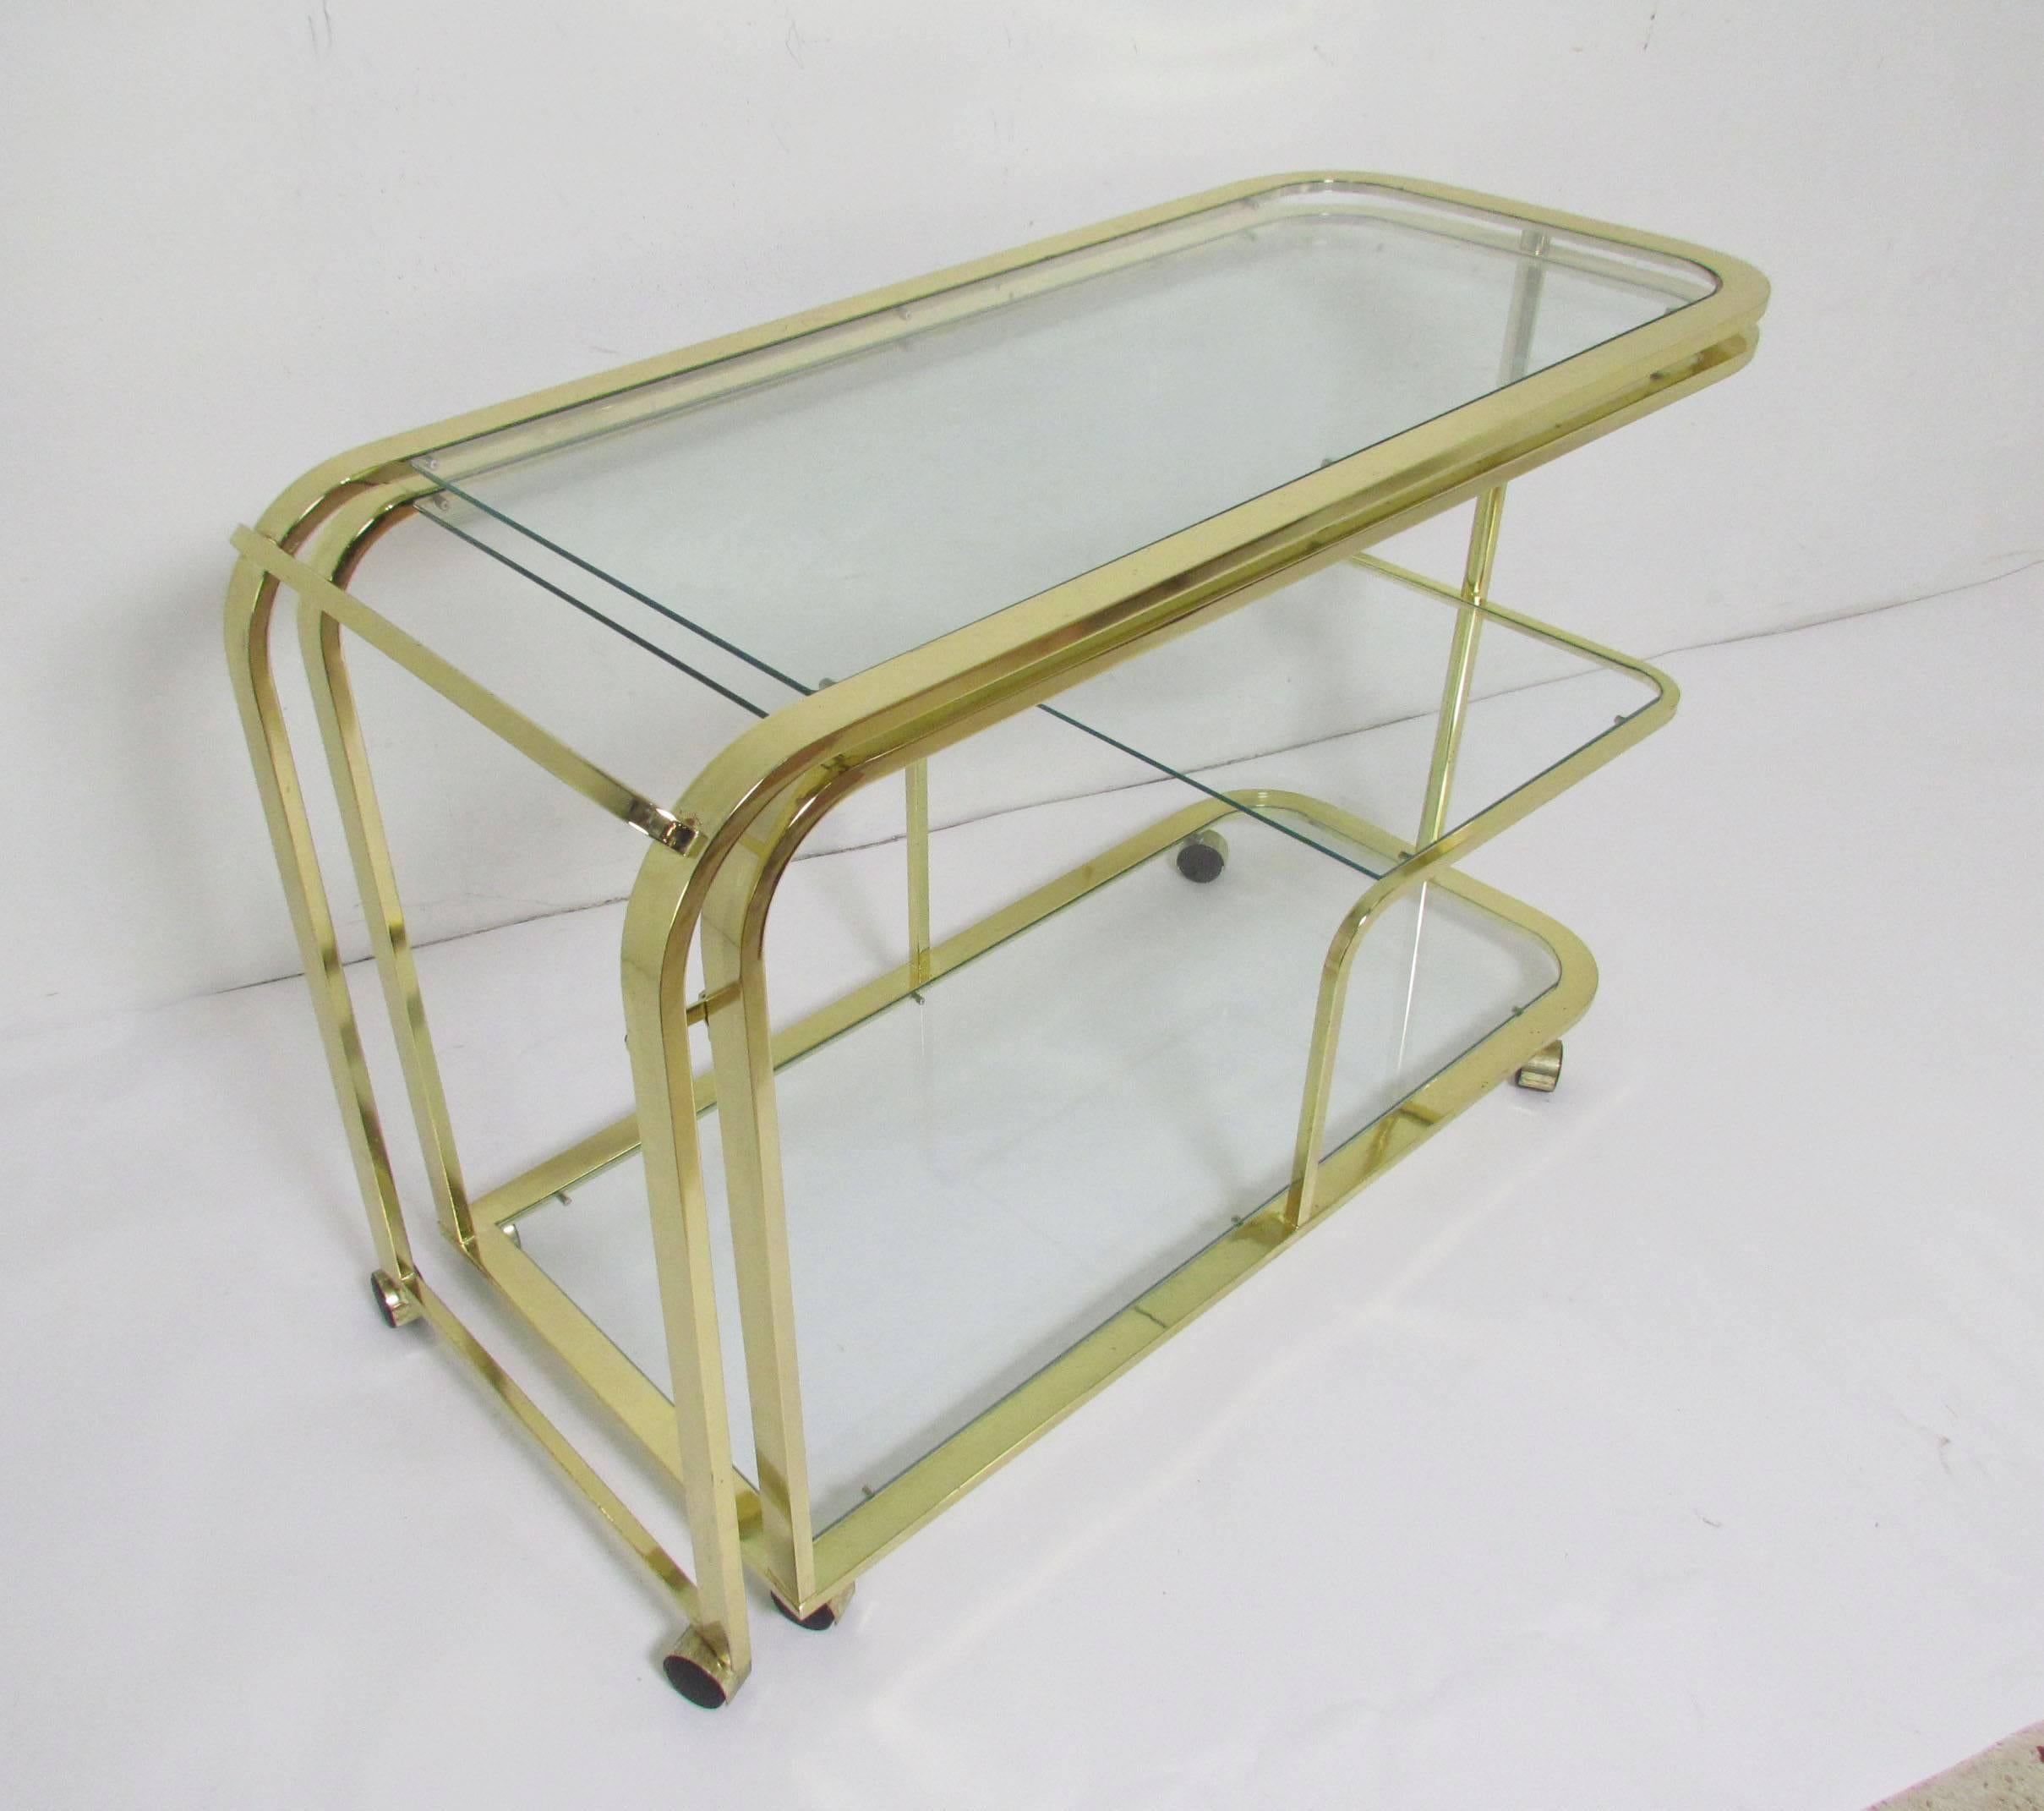 A three-tier bar cart by Design Institute America, High Point NC. Besides functioning as a handsome trolley, this piece can be opened as a full bar to serve guests.

Measures 86.75